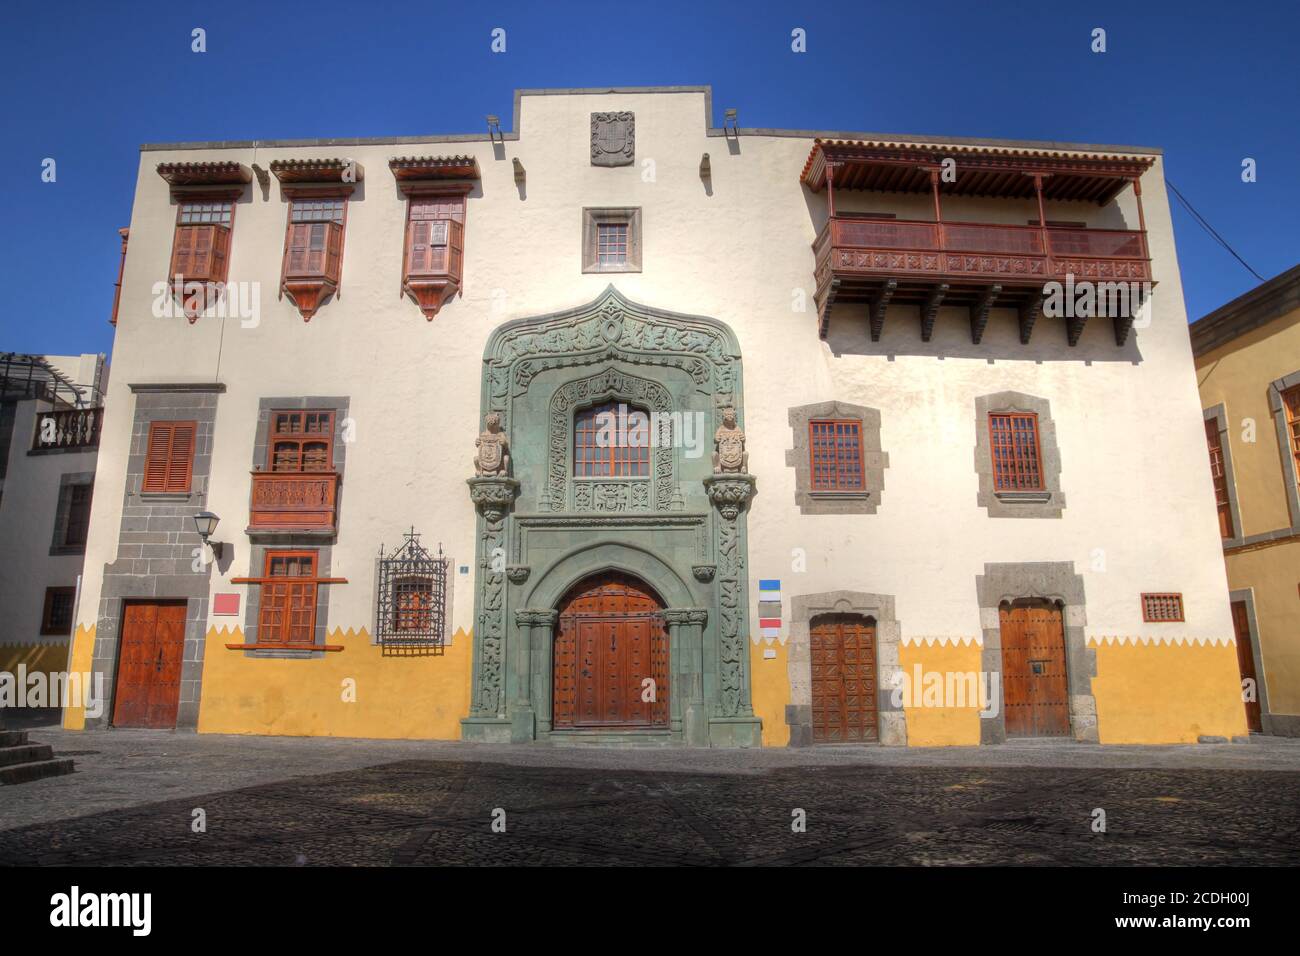 Columbus House (Case de Colon) in Las Palmas de Gran Canaria, Spain. The house was the residence of the first governors of the island and it is claime Stock Photo